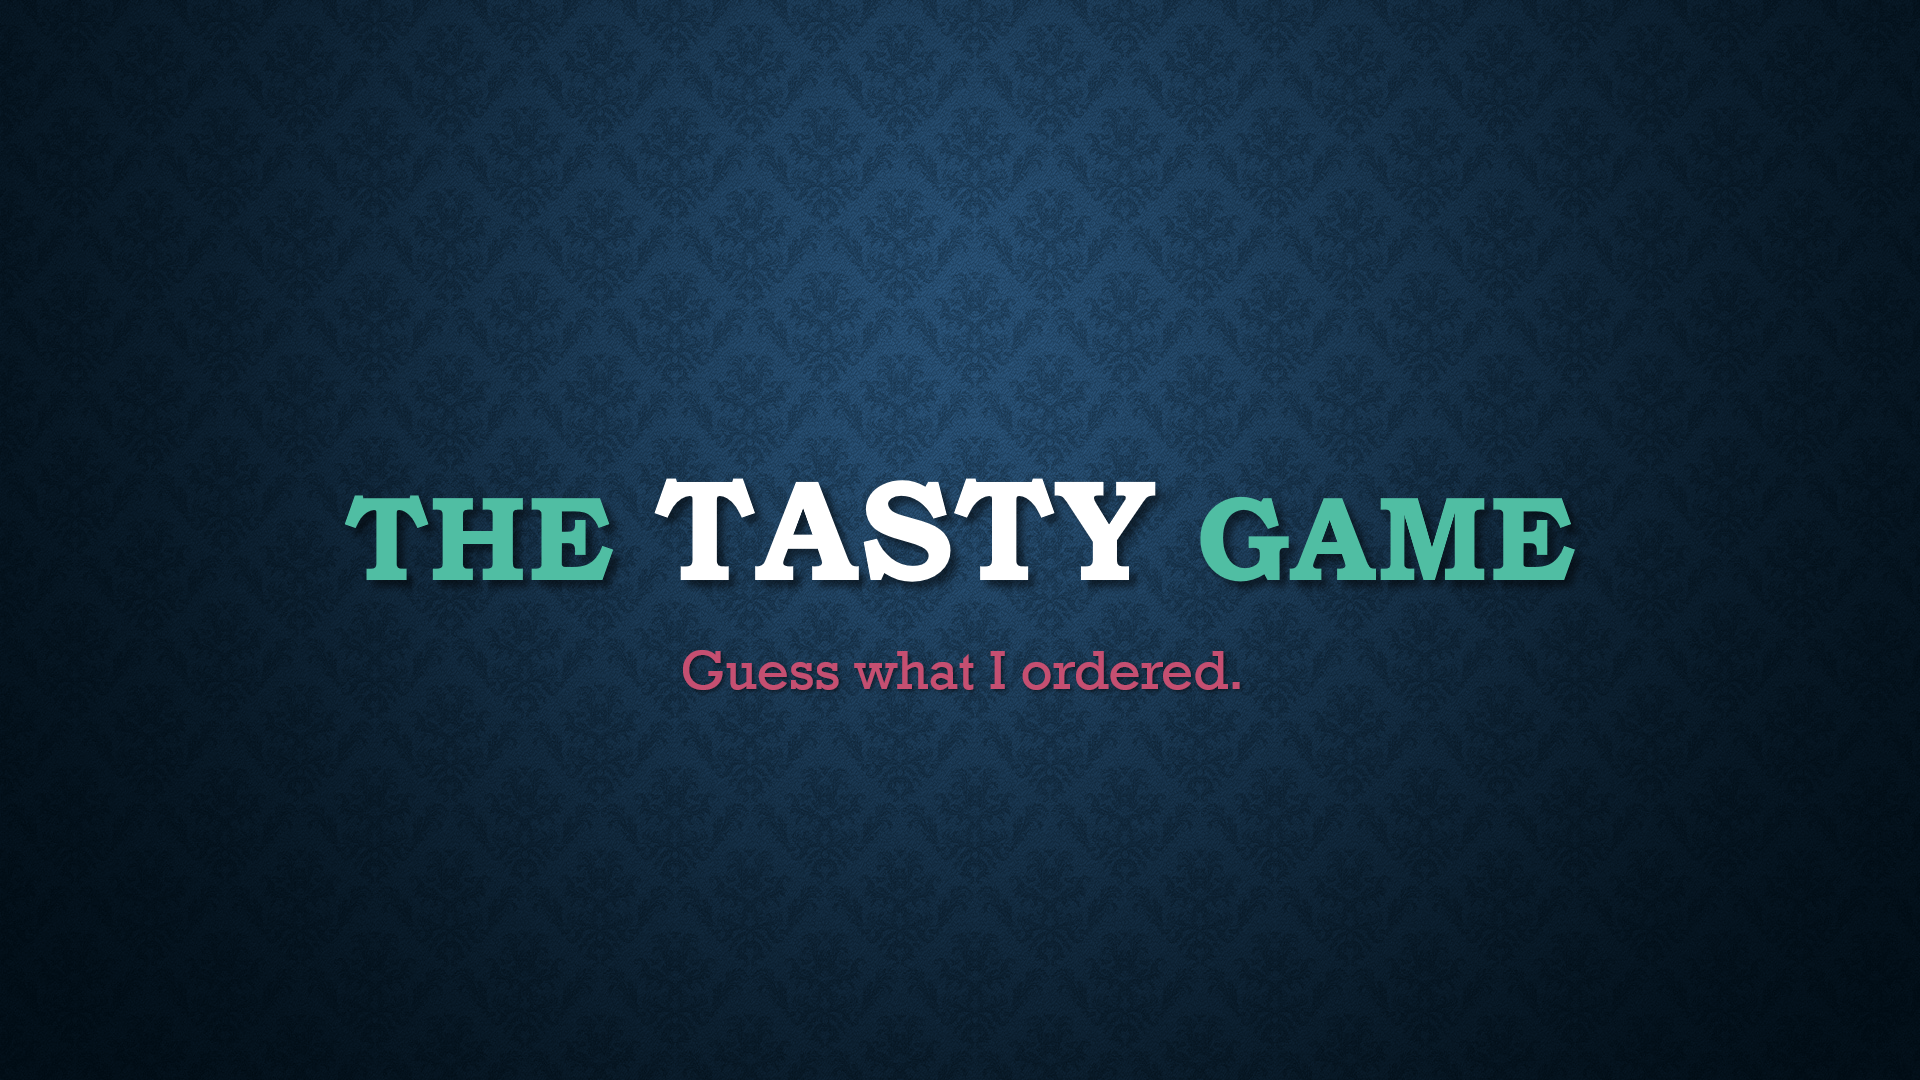 The Tasty Game